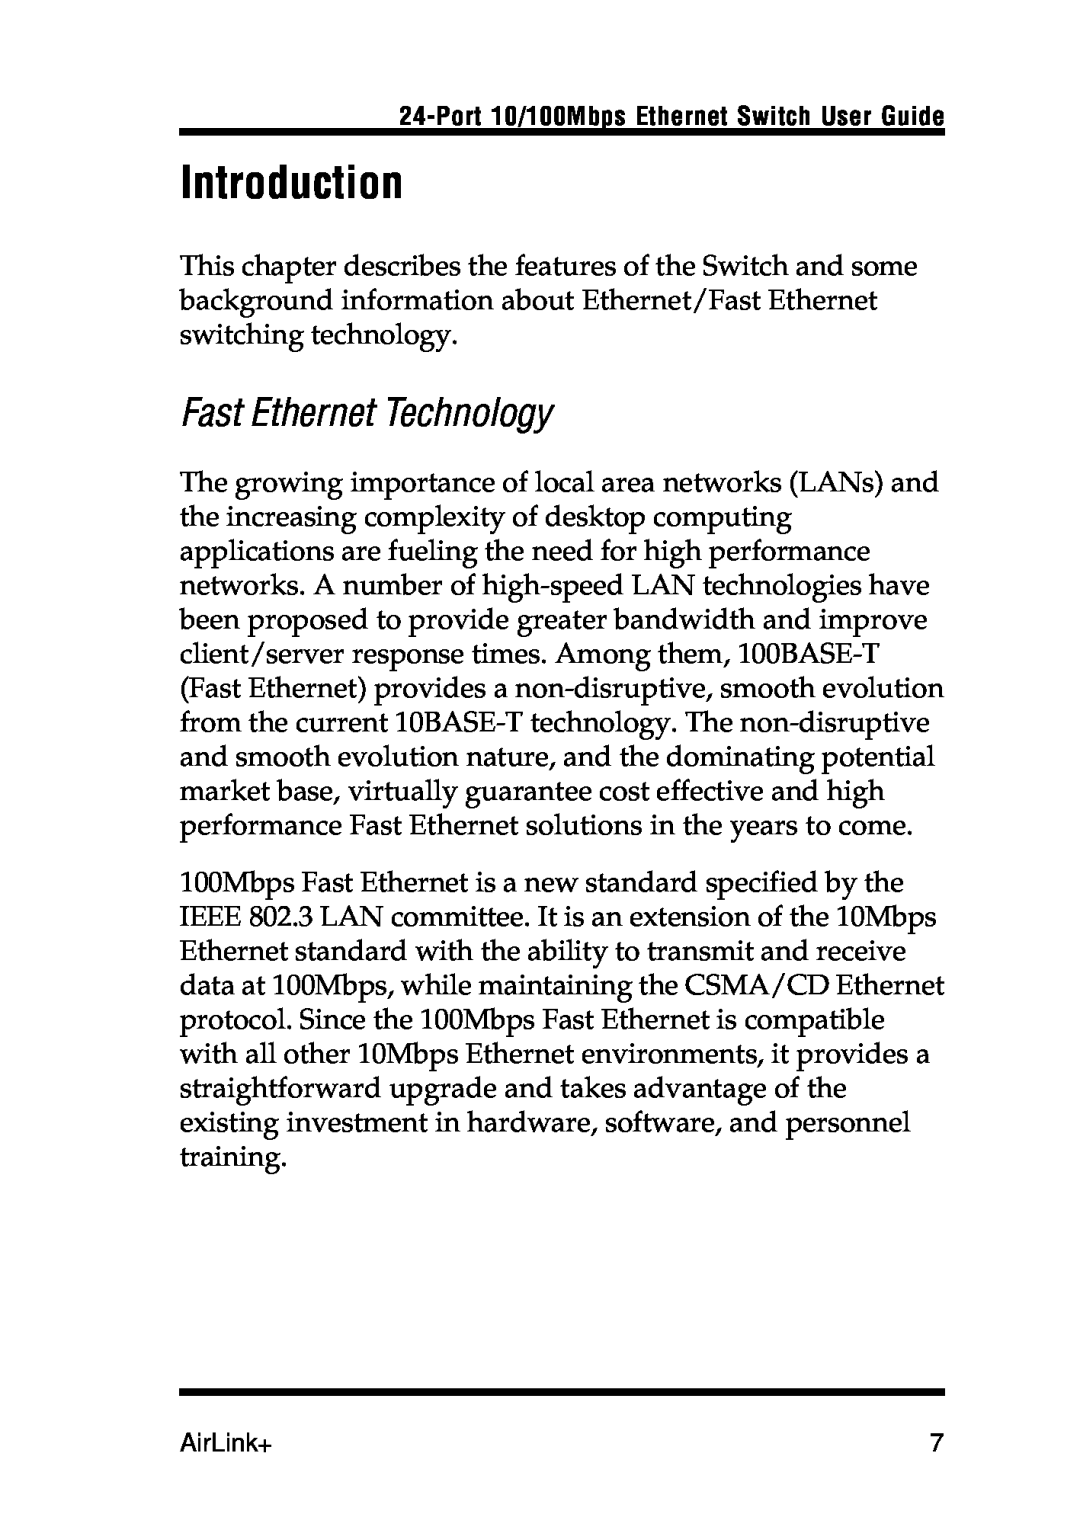 Airlink UG-ASW224-1103 manual Introduction, Fast Ethernet Technology 